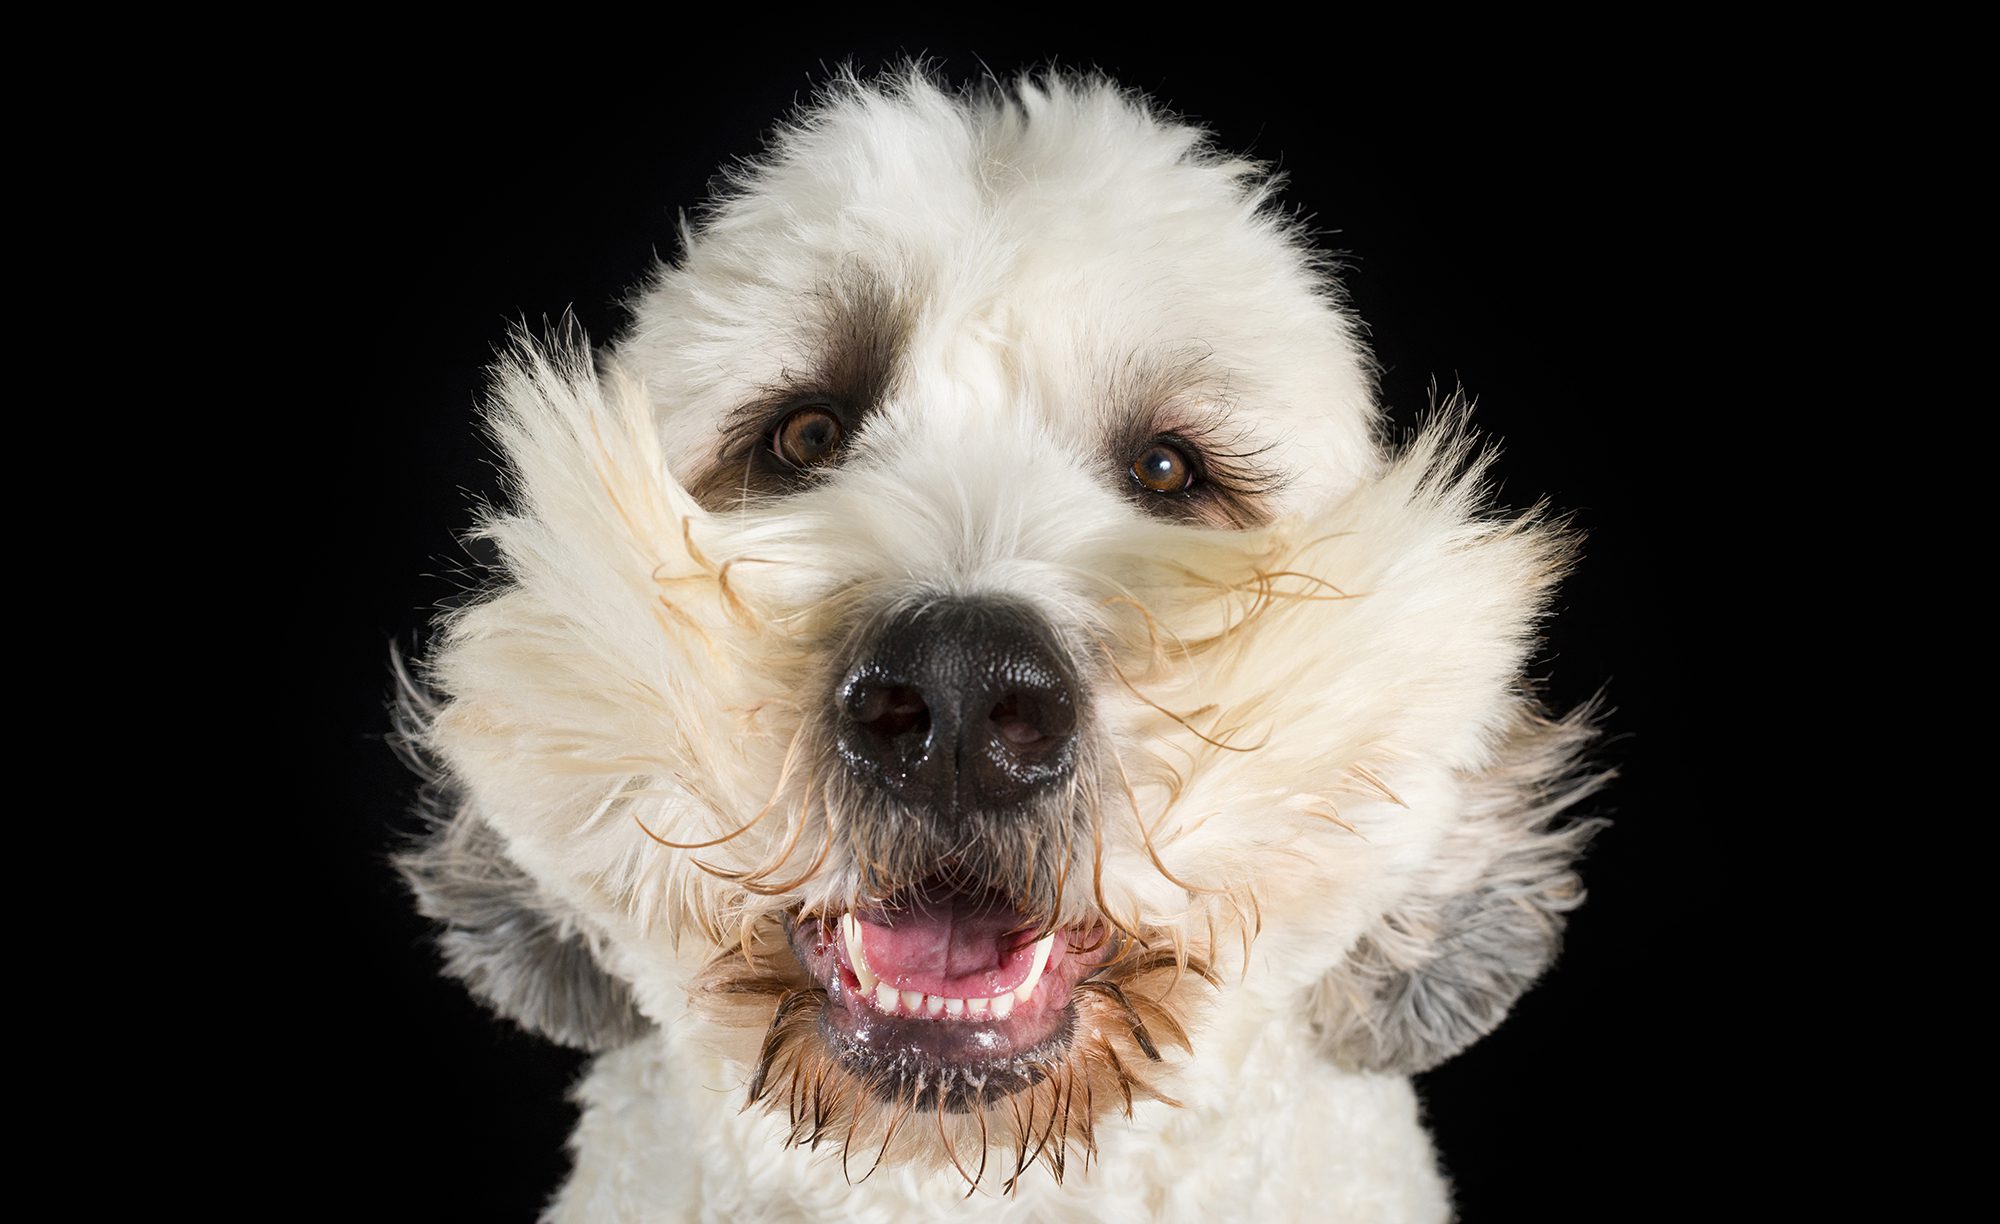 White fluffy dog for Windy Paws dog portrait session in Chicago Dog and Family Photography Studio